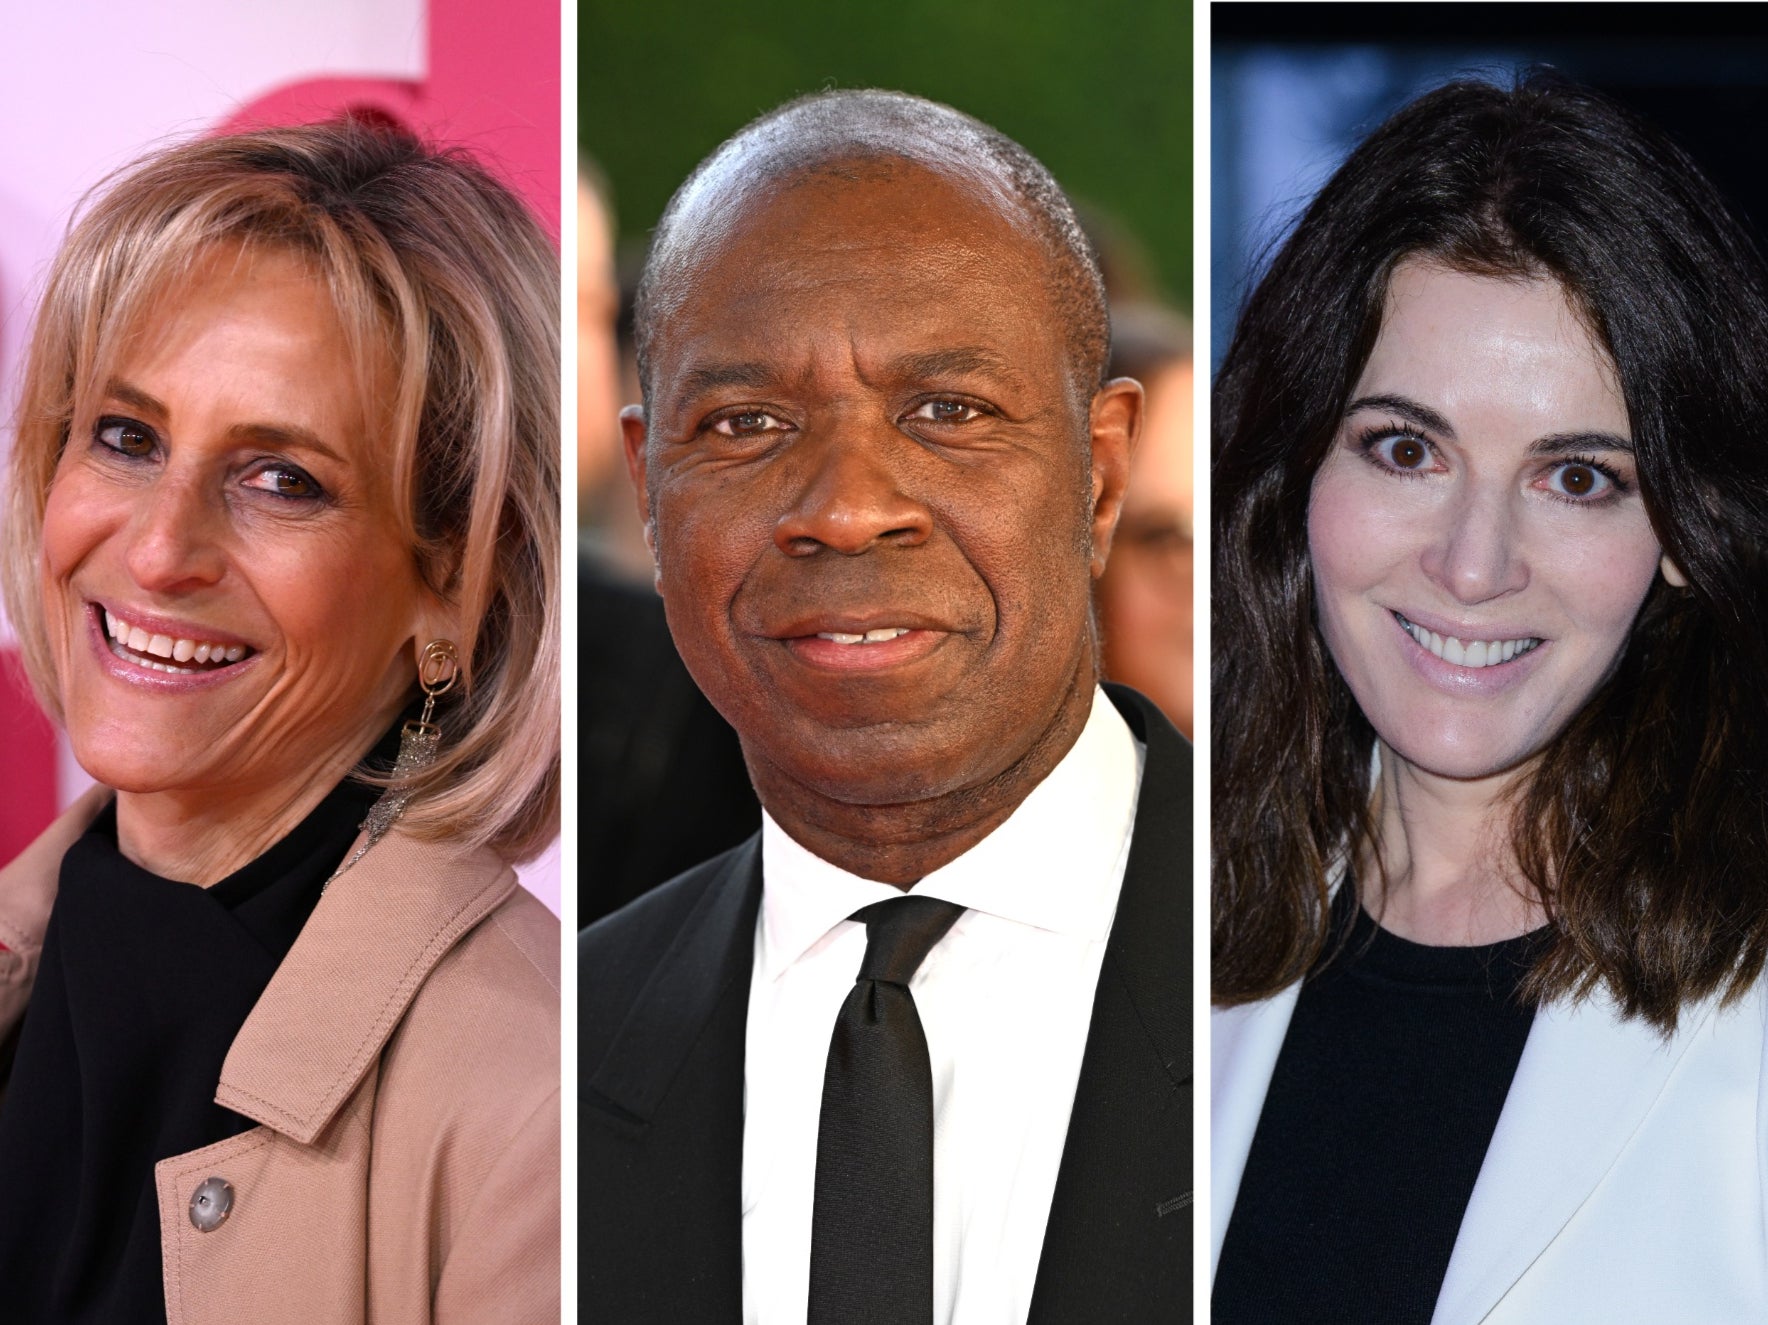 Emily Maitlis, Clive Myrie, and Nigella Lawson all shared their best wishes for the veteran BBC journalist